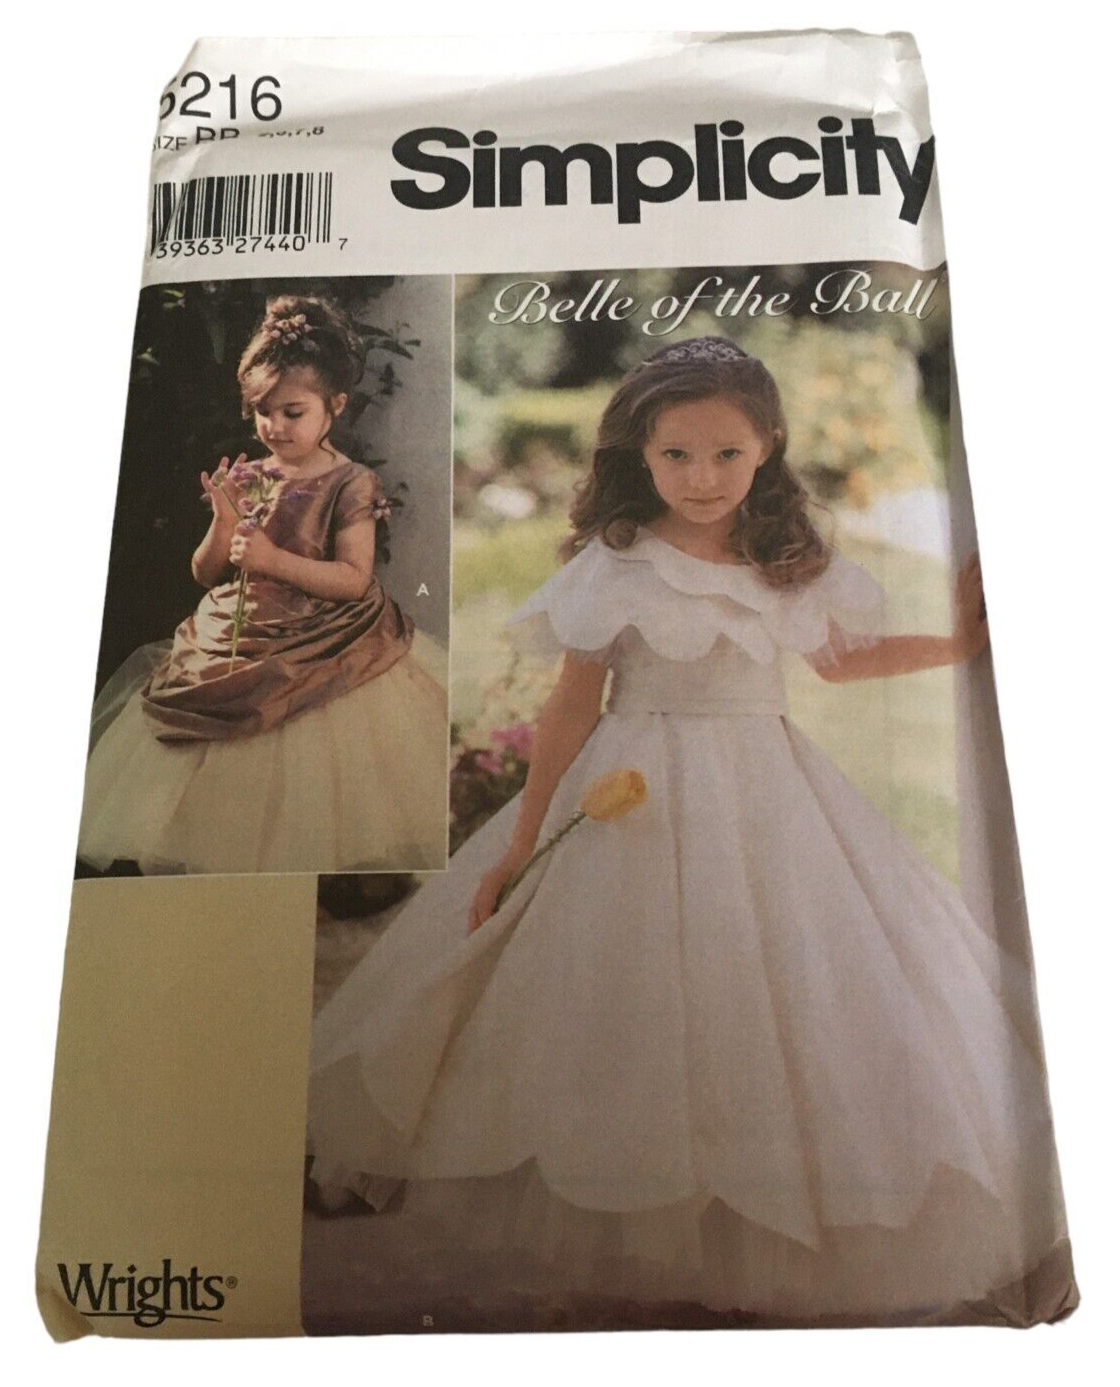 Simplicity Sewing Pattern 5216 Belle of the Ball Fancy Dress Wedding Girl 5-8 UC - $7.99